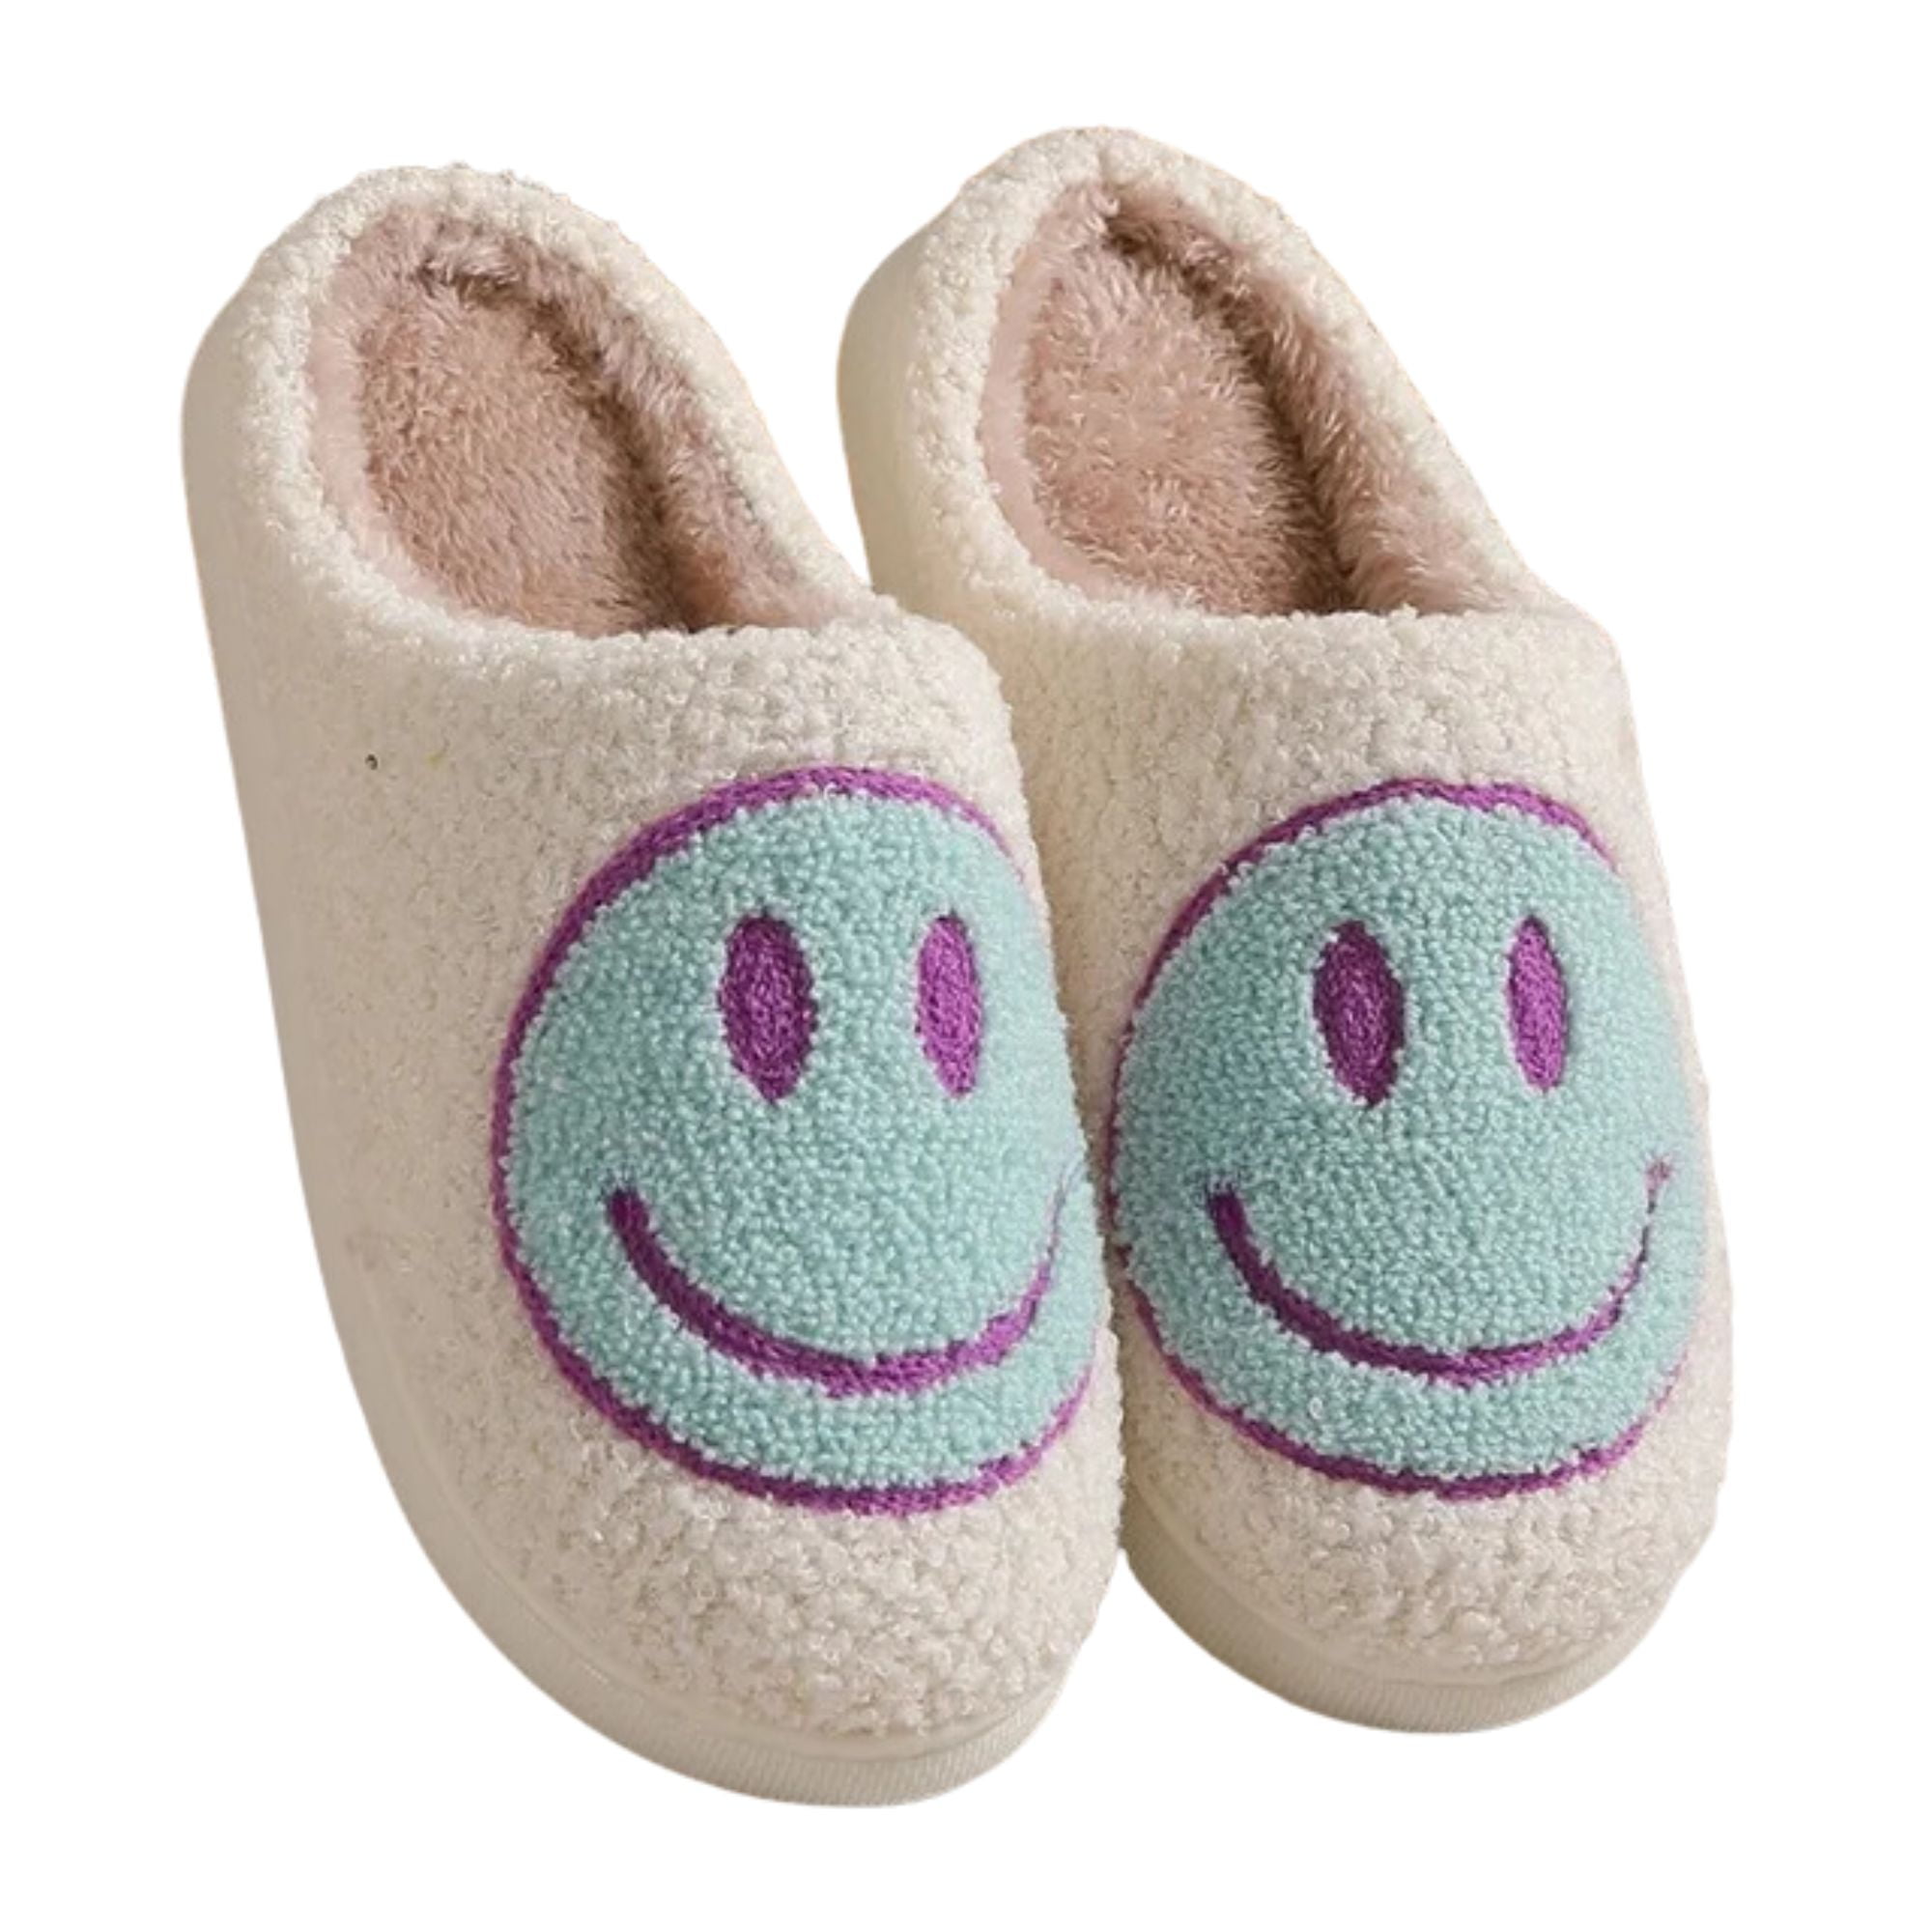 BERANMEY Cute Smile Face Slippers for Women Perfect Soft Plush Comfy Warm Slip-On Happy Face Slippers fo Women Indoor fluffy Smile House Slippers for Women and Men Non-slip Fuzzy Flat Slides - image 1 of 8